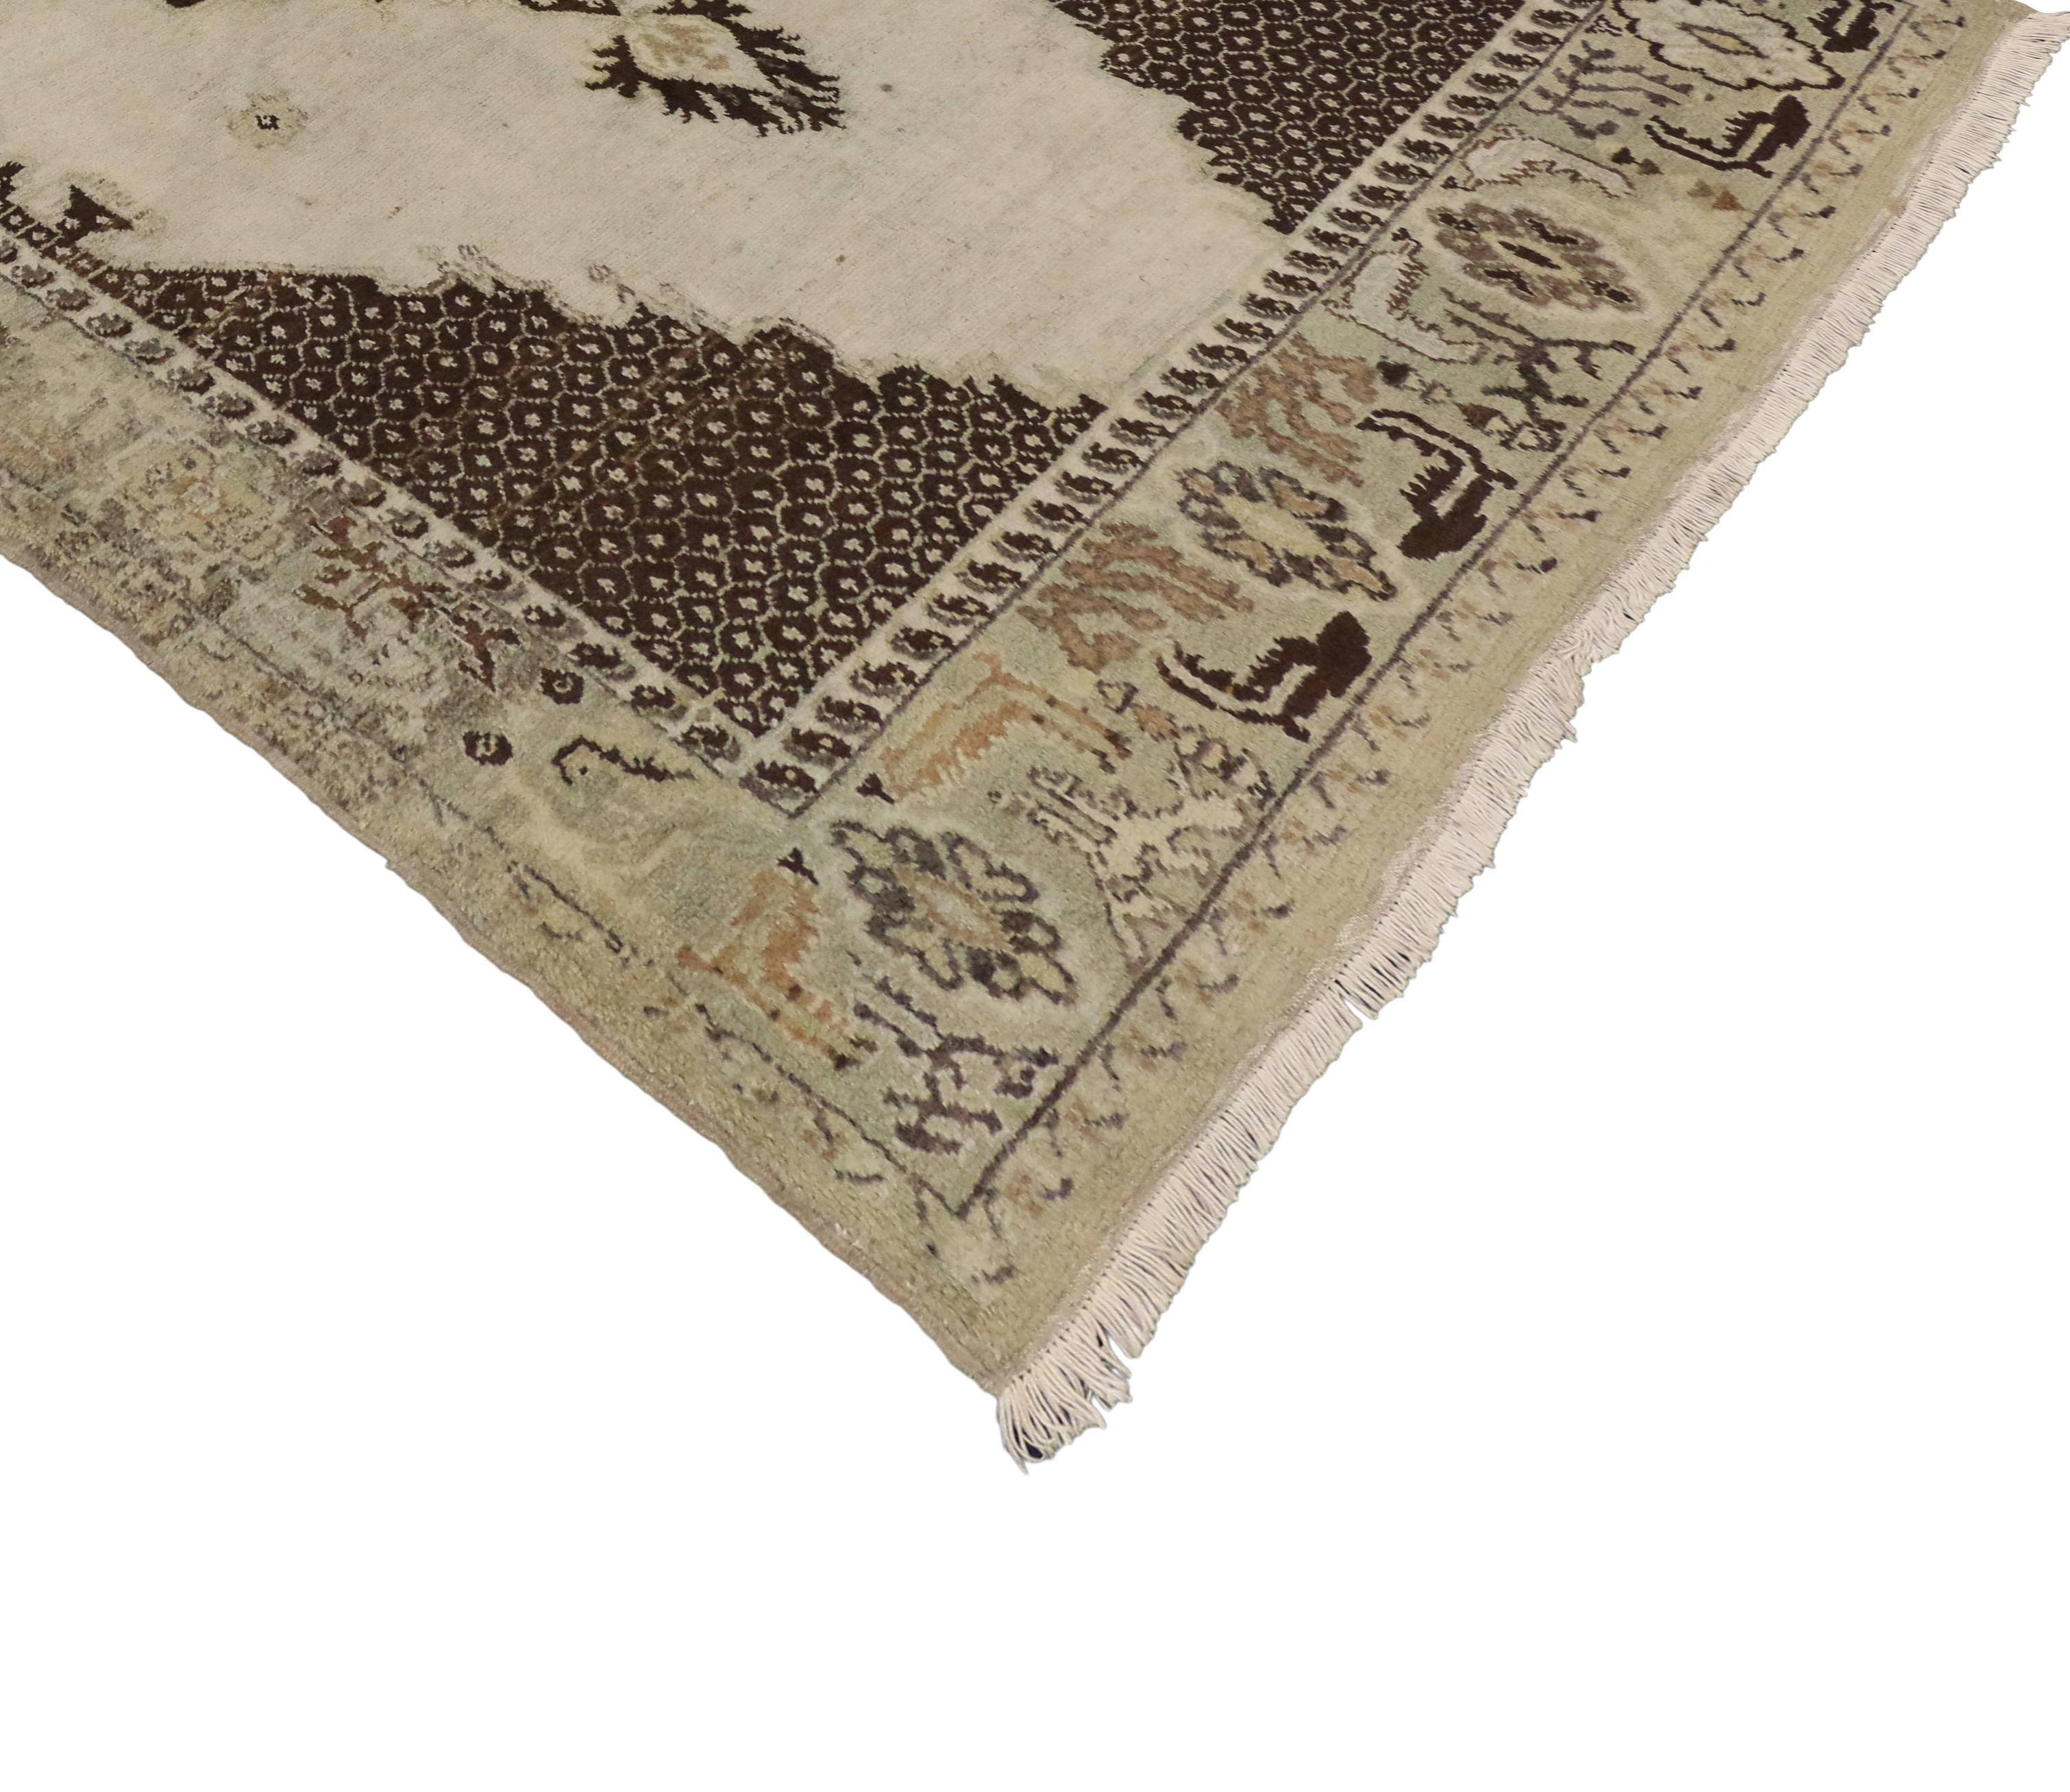 74123, a vintage Oushak rug with medallion and corner design. This hand-knotted wool vintage Turkish Oushak rug features an ornate center medallion bordered with a scrolled vine pattern, anchored by two palmettes. This intricate medallion floats on